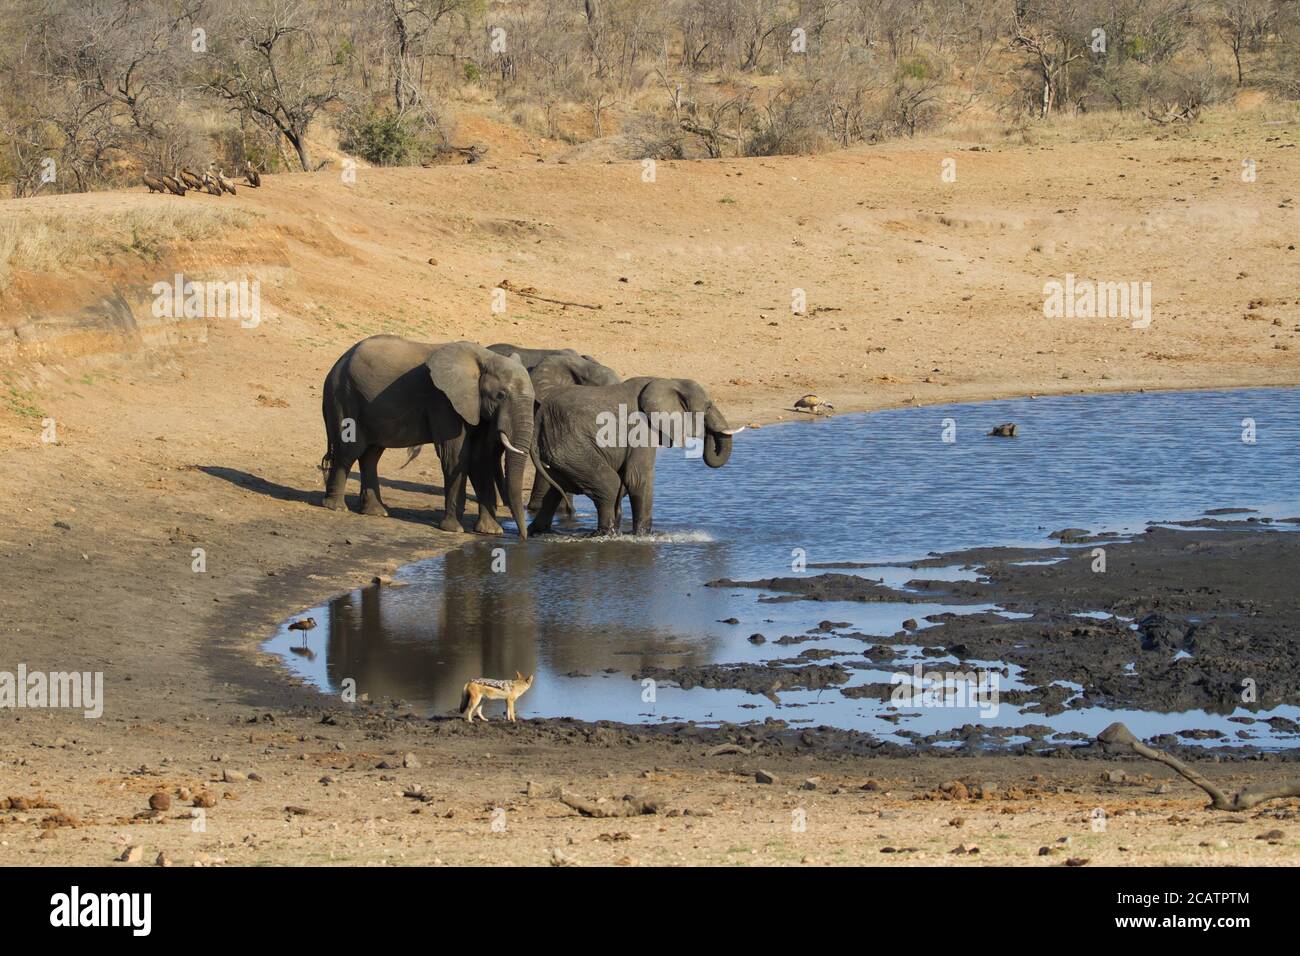 Elephants drinking at a waterhole in Kruger National Park while vultures and a jackal observe Stock Photo